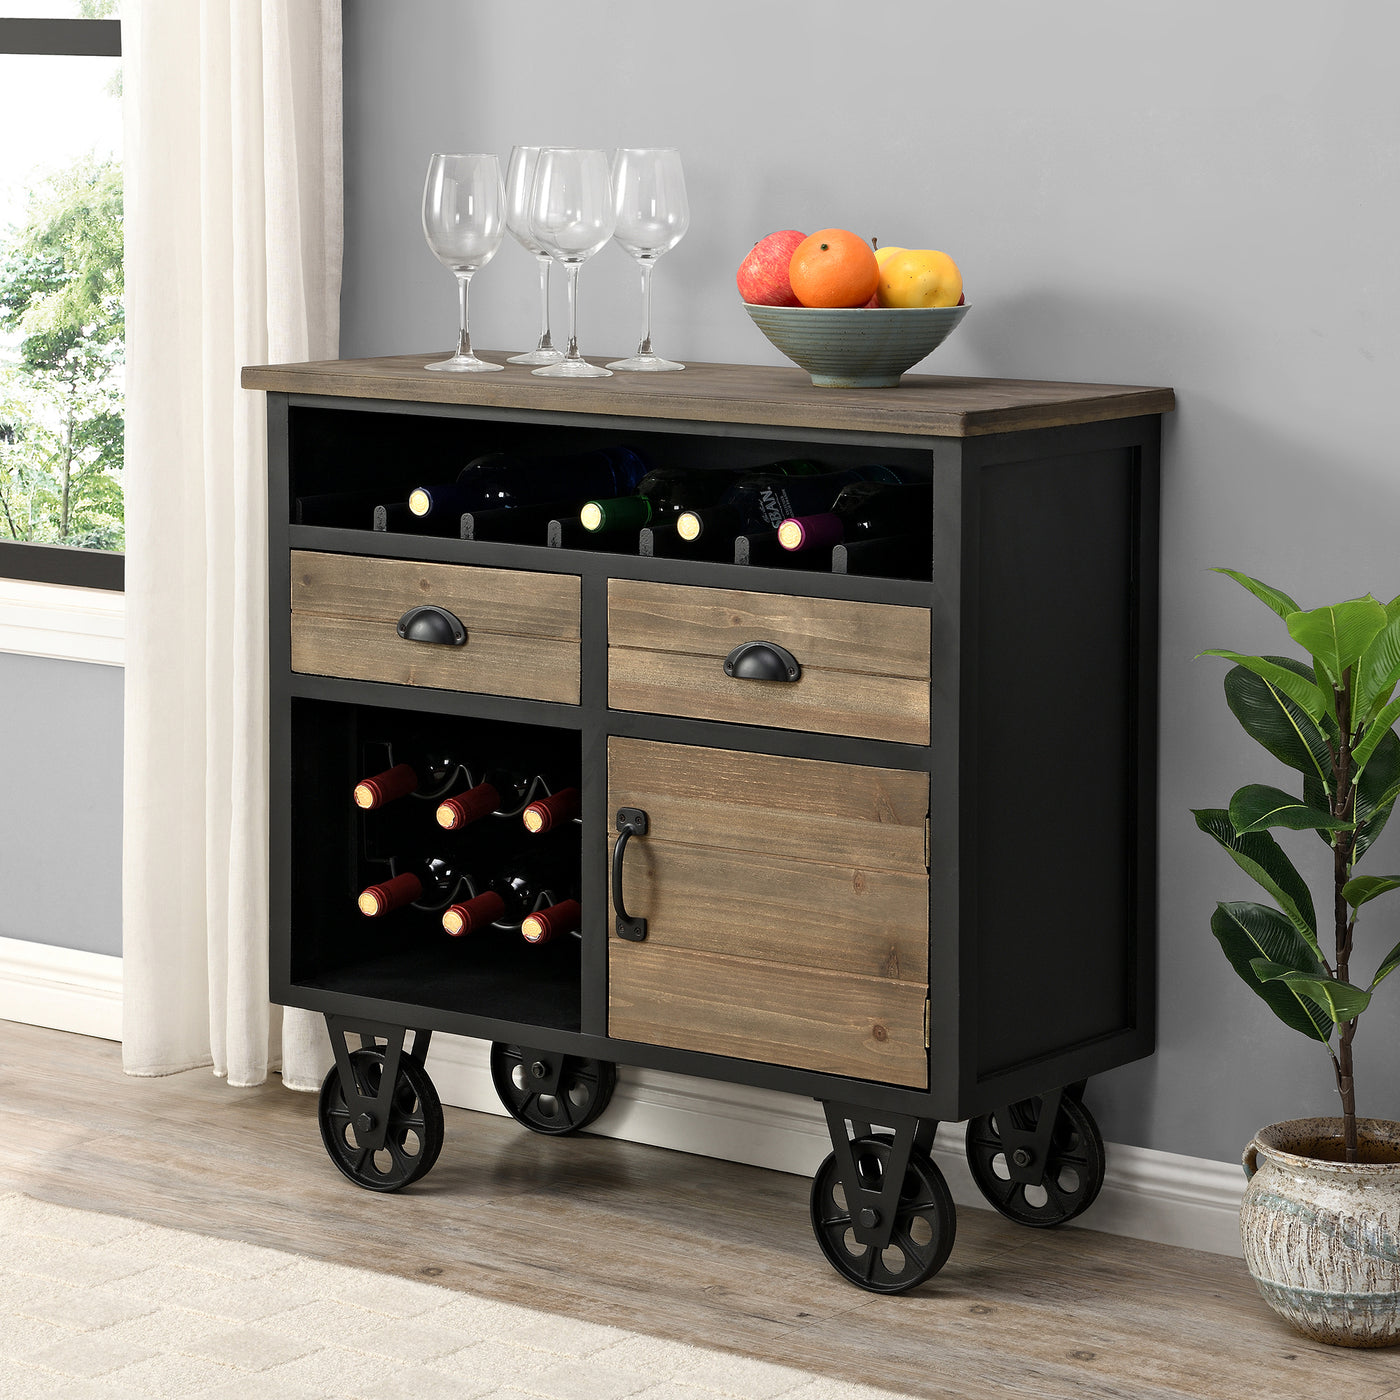 FirsTime & Co. Black And Brown Logan Bar Cart, Farmhouse Style, Made of Wood